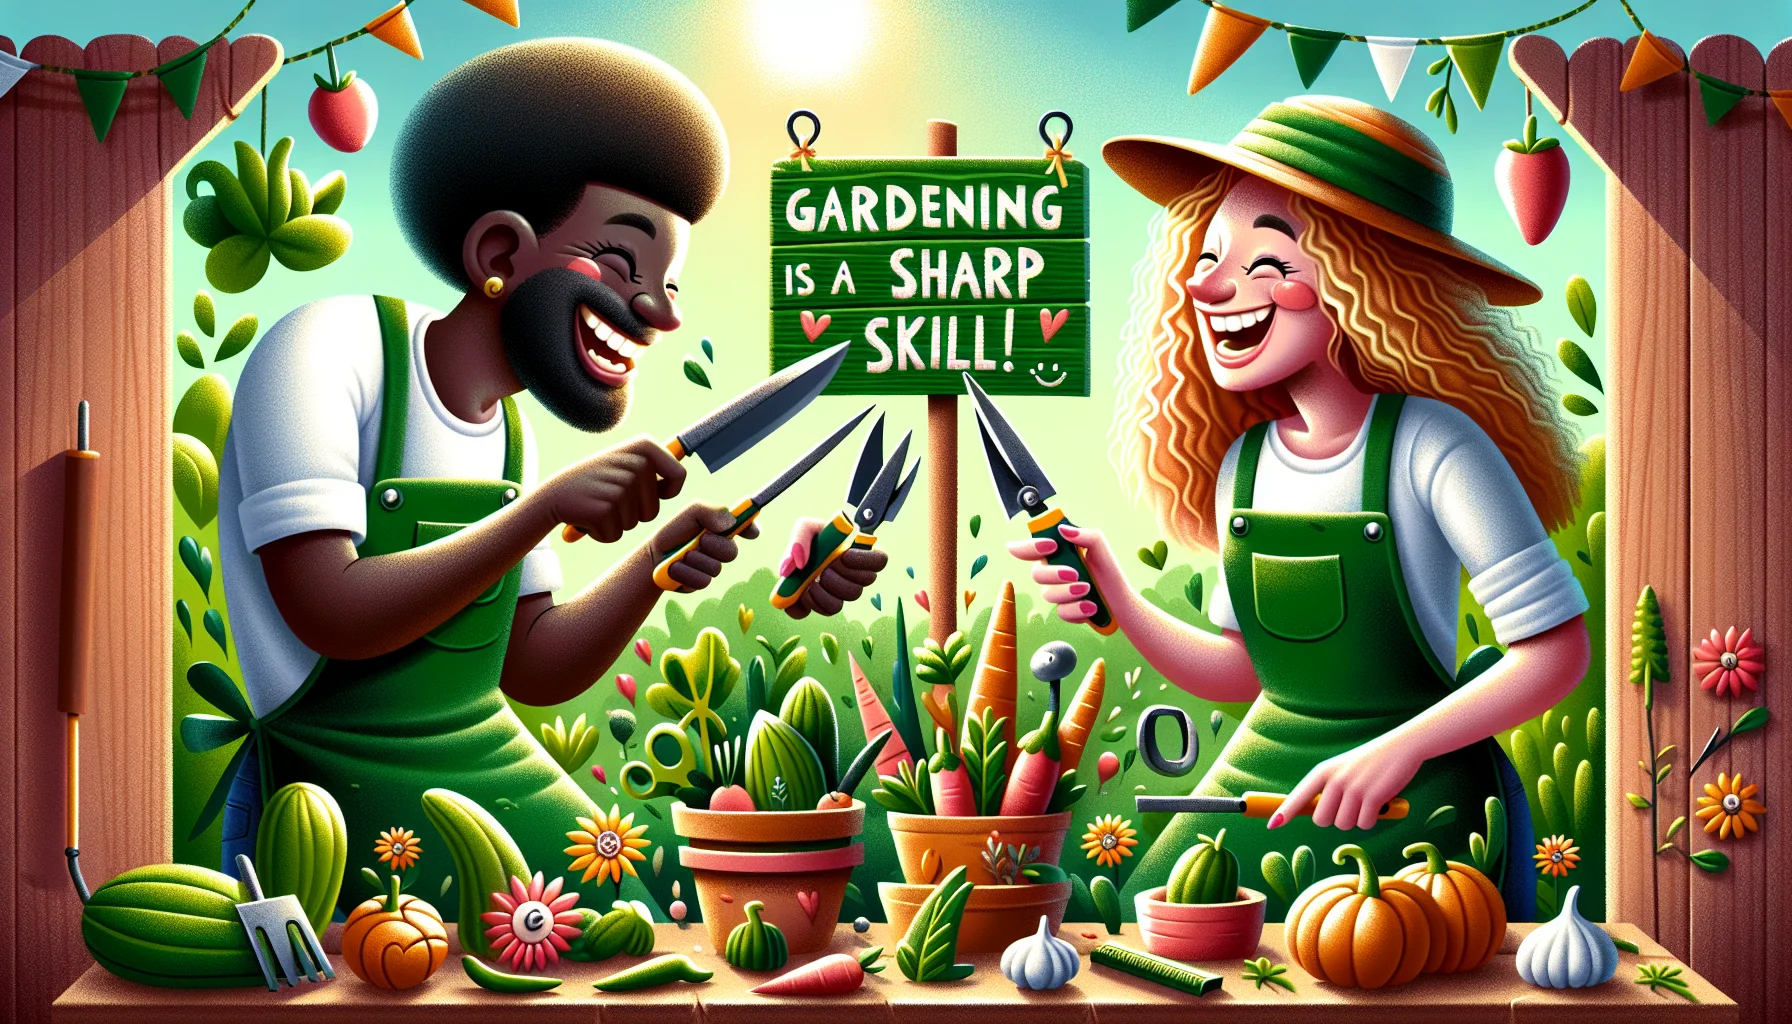 Create a fun and lively scene in a green garden where a black man and a white woman are having friendly competition sharpening their garden tools. They are laughing and surrounded by an array of amusingly shaped vegetables and flowers. Behind them is a quirky, hand-painted sign that reads 'Gardening is a Sharp Skill!'. The sun is casting a warm, sunset light over the scene, adding to the cozy and inviting atmosphere. Let the design of the image be clear and detailed, encouraging everyone who sees it to find joy in gardening.